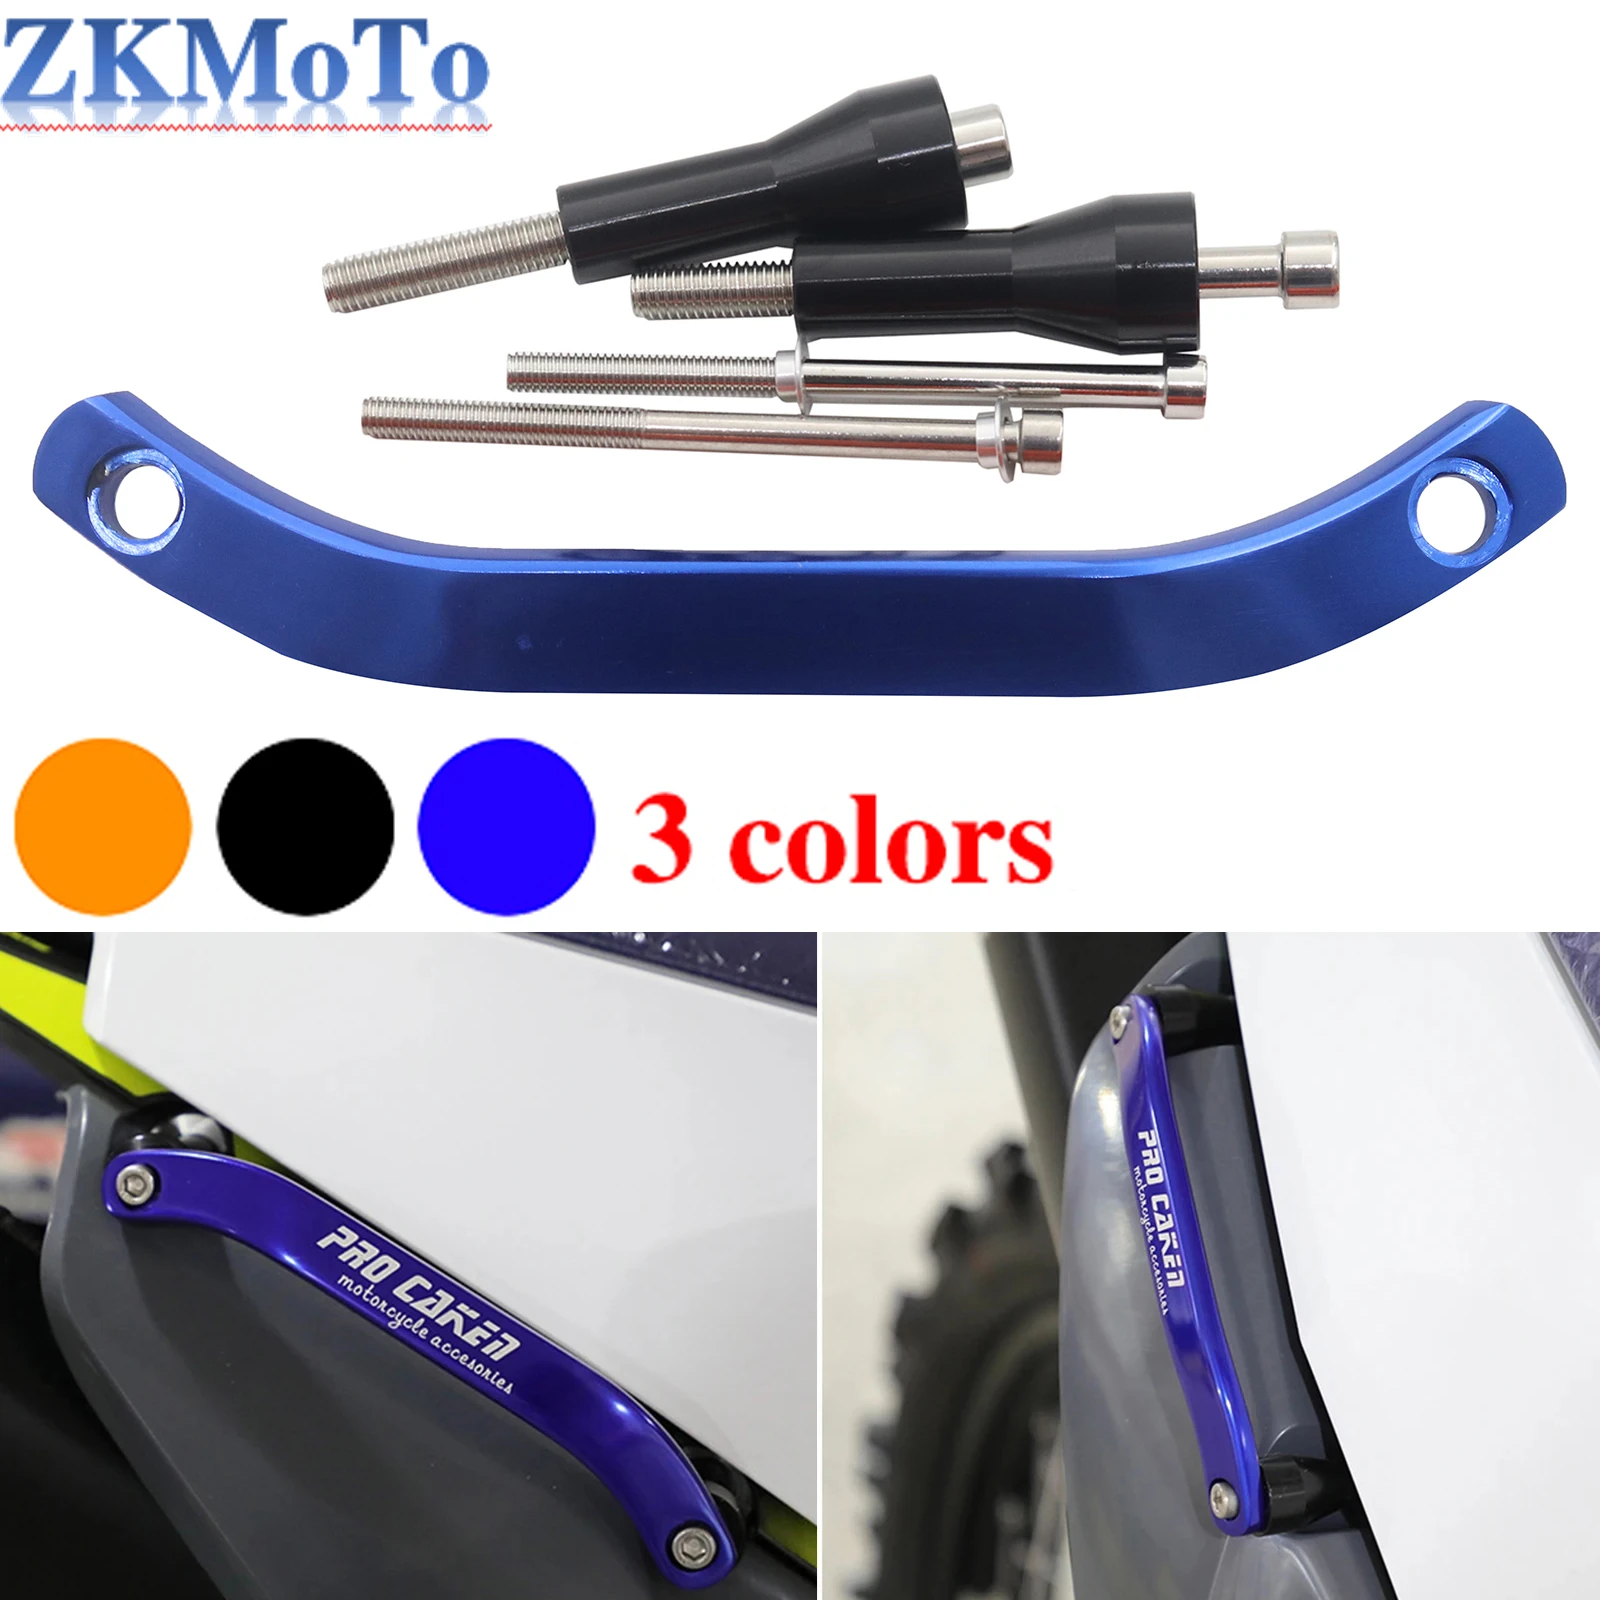 

Rear Seat Grab Handle Motorcycle CNC Rail Handle Handrail For KTM 125-450 EXC EXCF SX SXF XC XCF XCW TPI SIX DAYS 2019 2020 2021